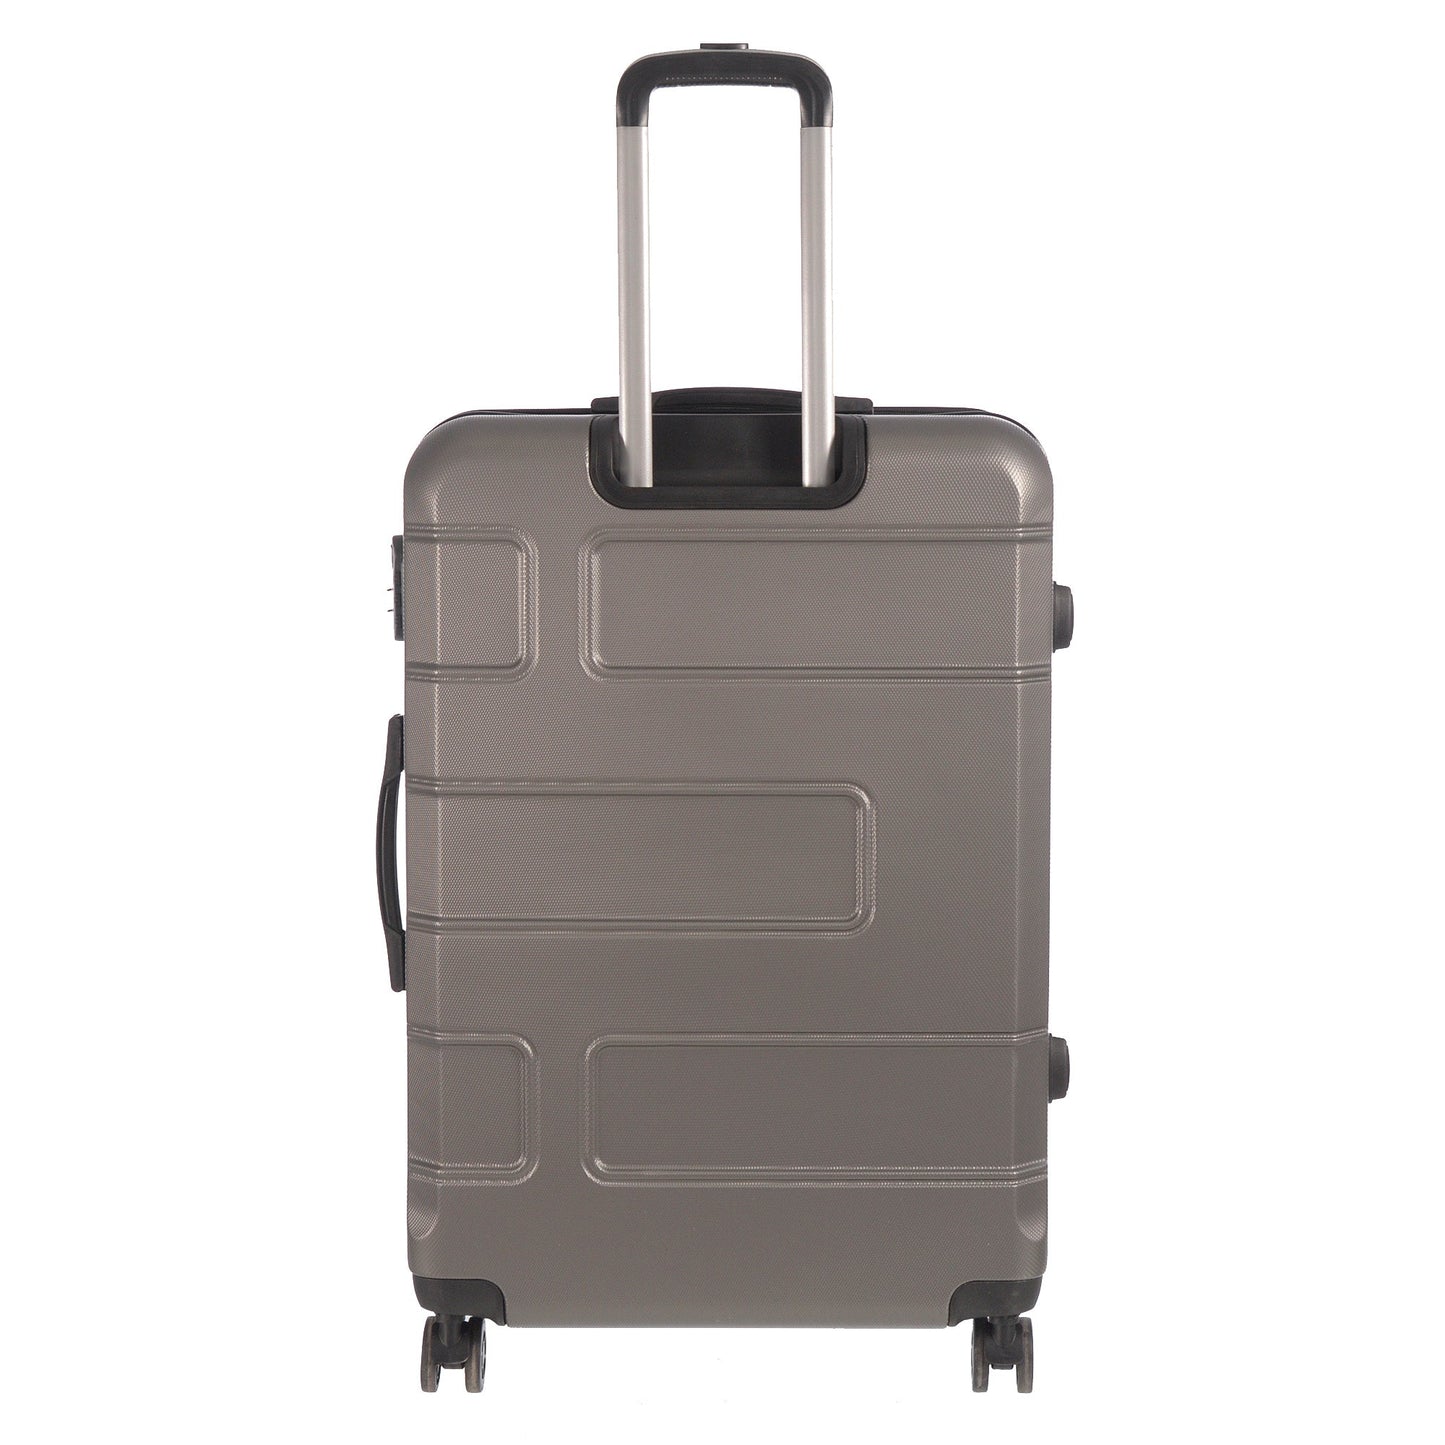 28" Large Size Luggage Deco Collection